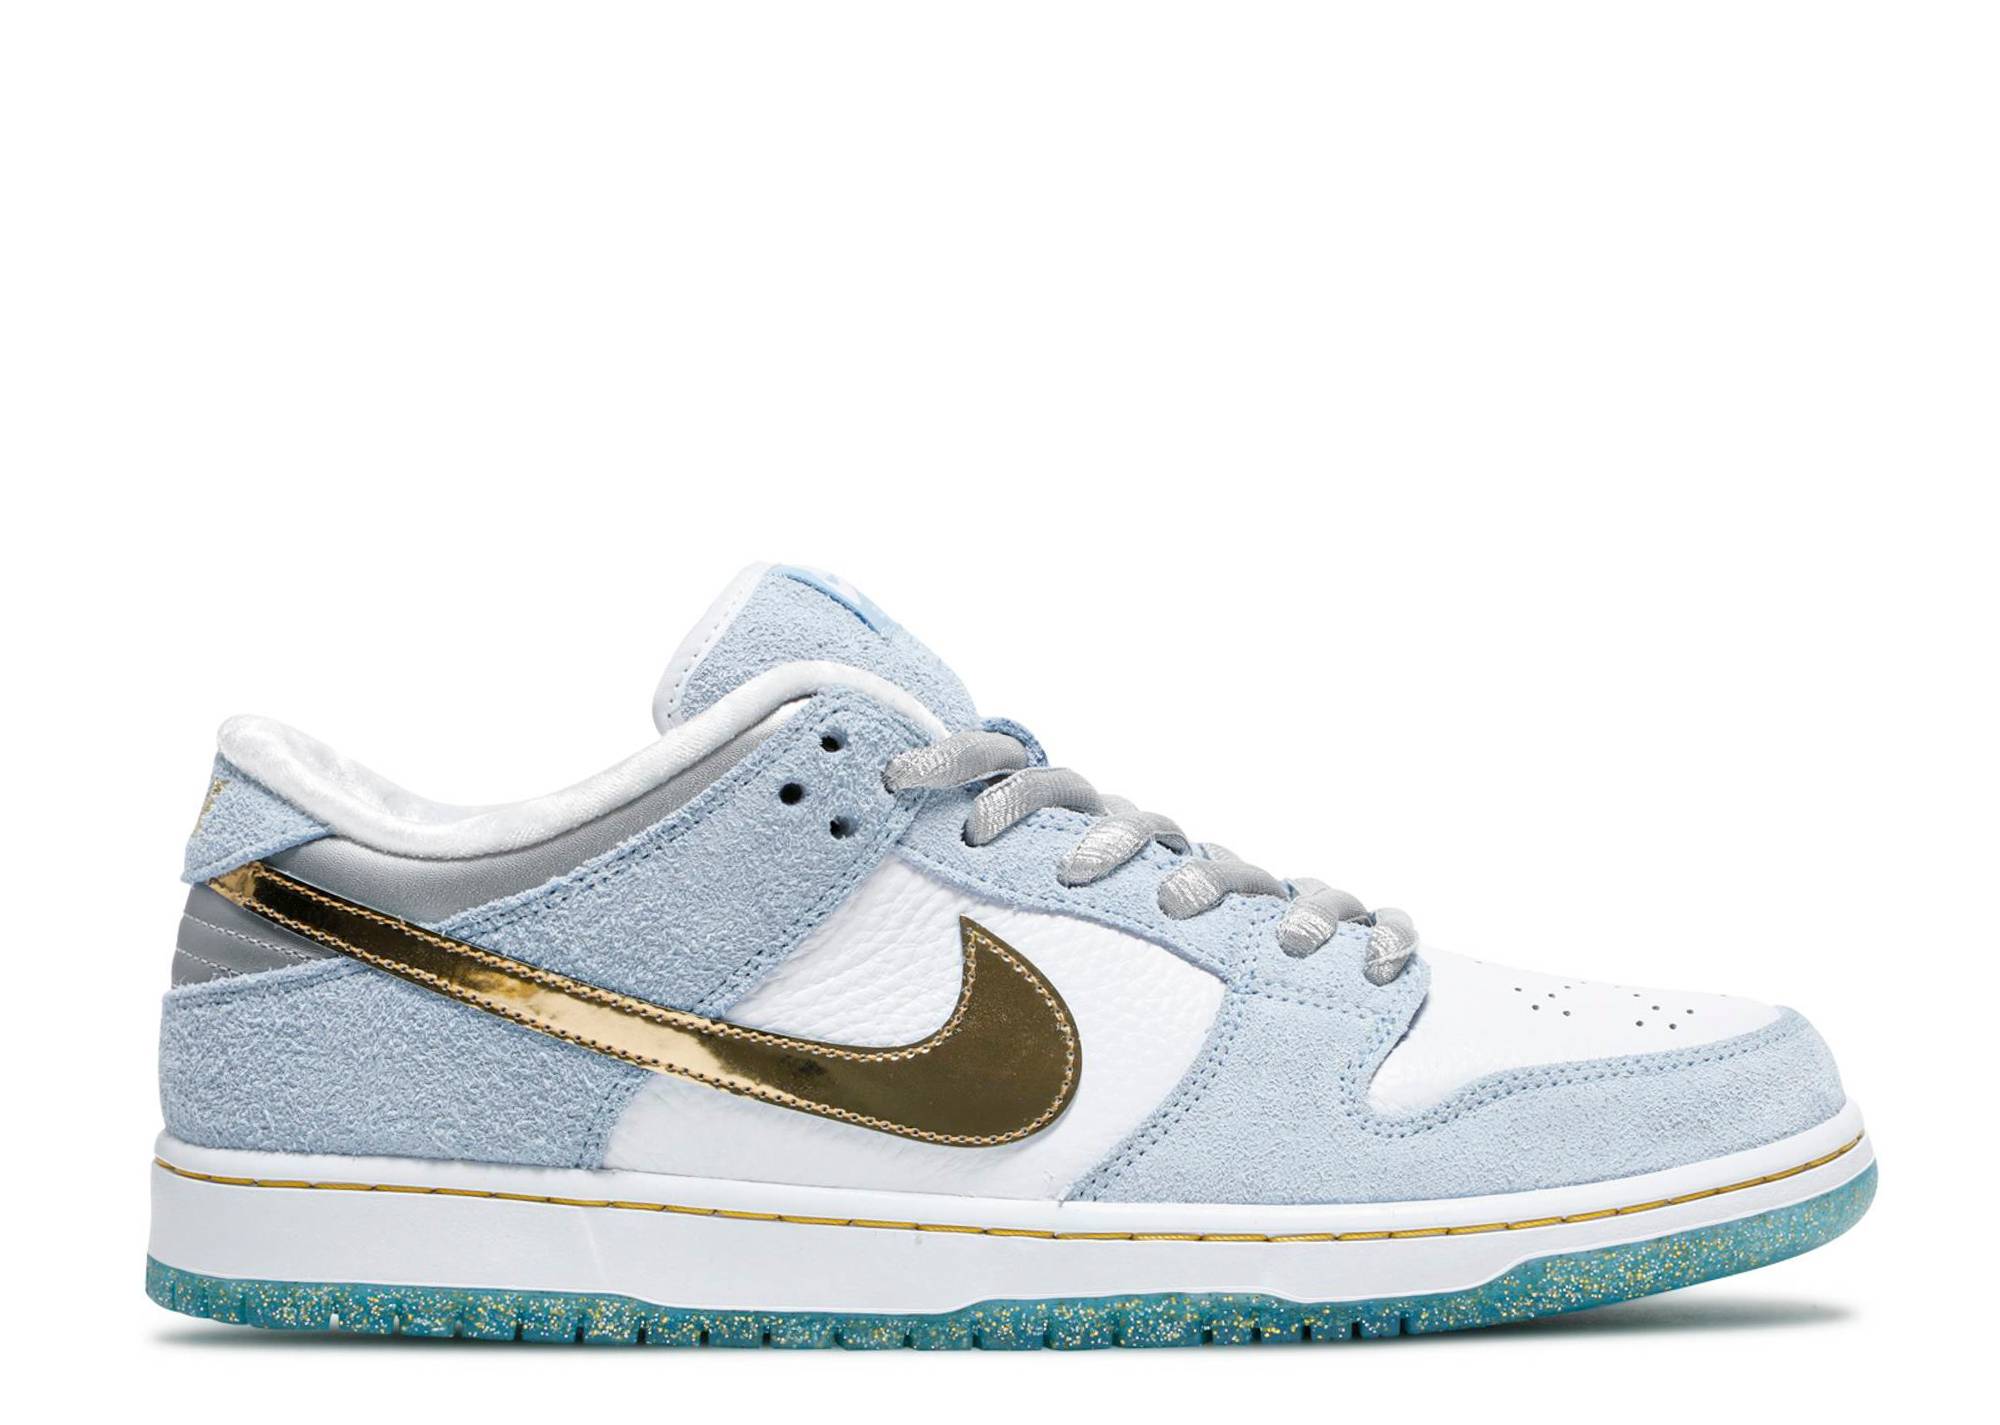 Sean Cliver x Dunk Low SB Holiday Special